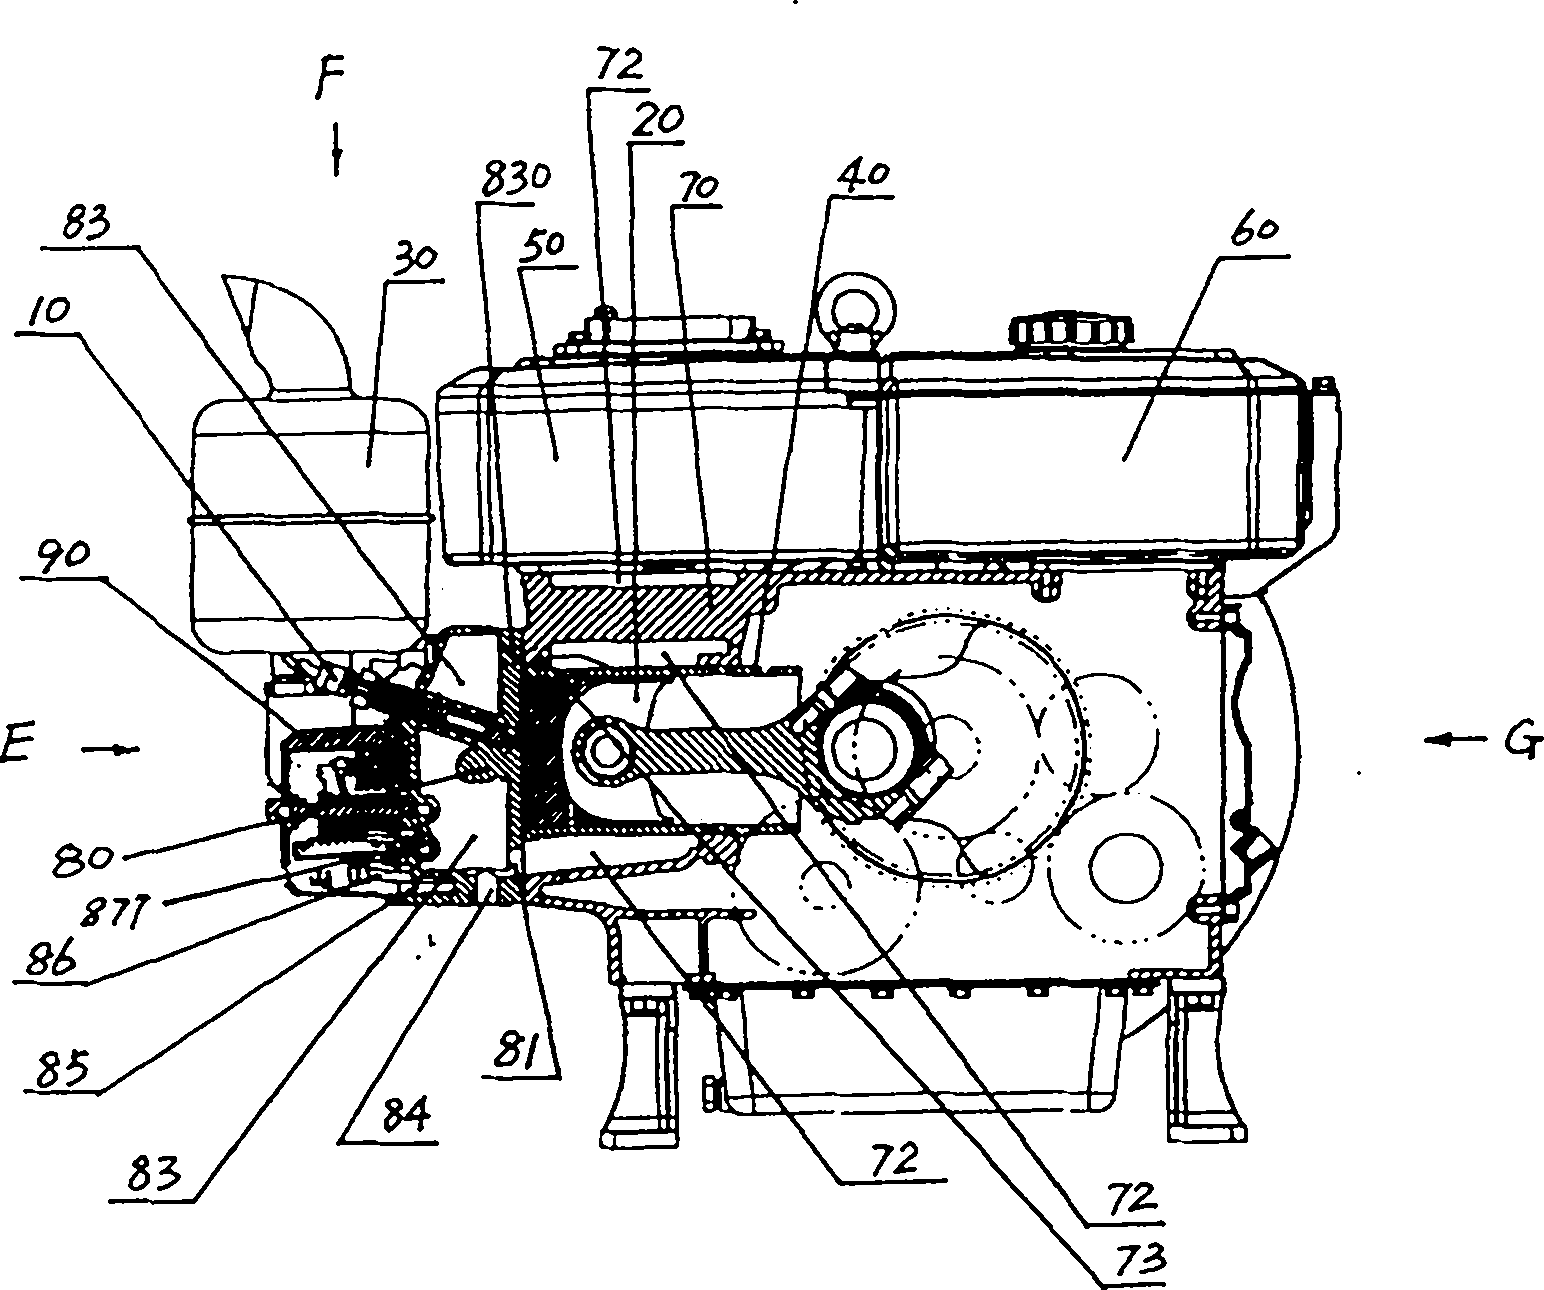 Water-cooled internal combustion engine cylinder head and water-cooled internal combustion engine with same